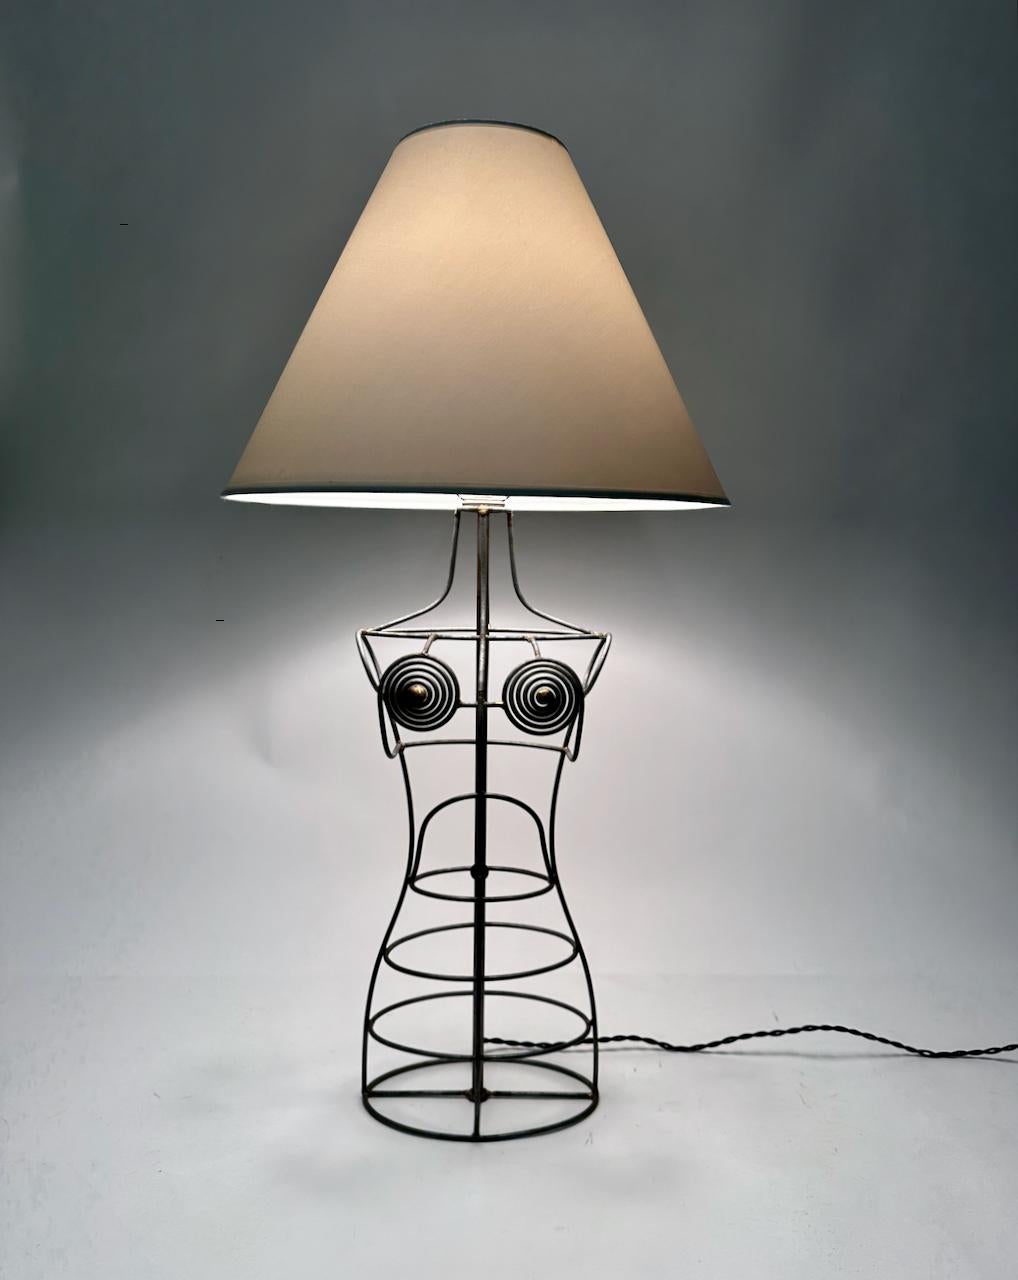 Tall Industrial Modern handcrafted welded galvanized steel wire form mannequin table lamp. Featuring an open abstract sculptural female formed framework. Small footprint. White hardback lamp shade shown for display only and not for sale (11H x 5D